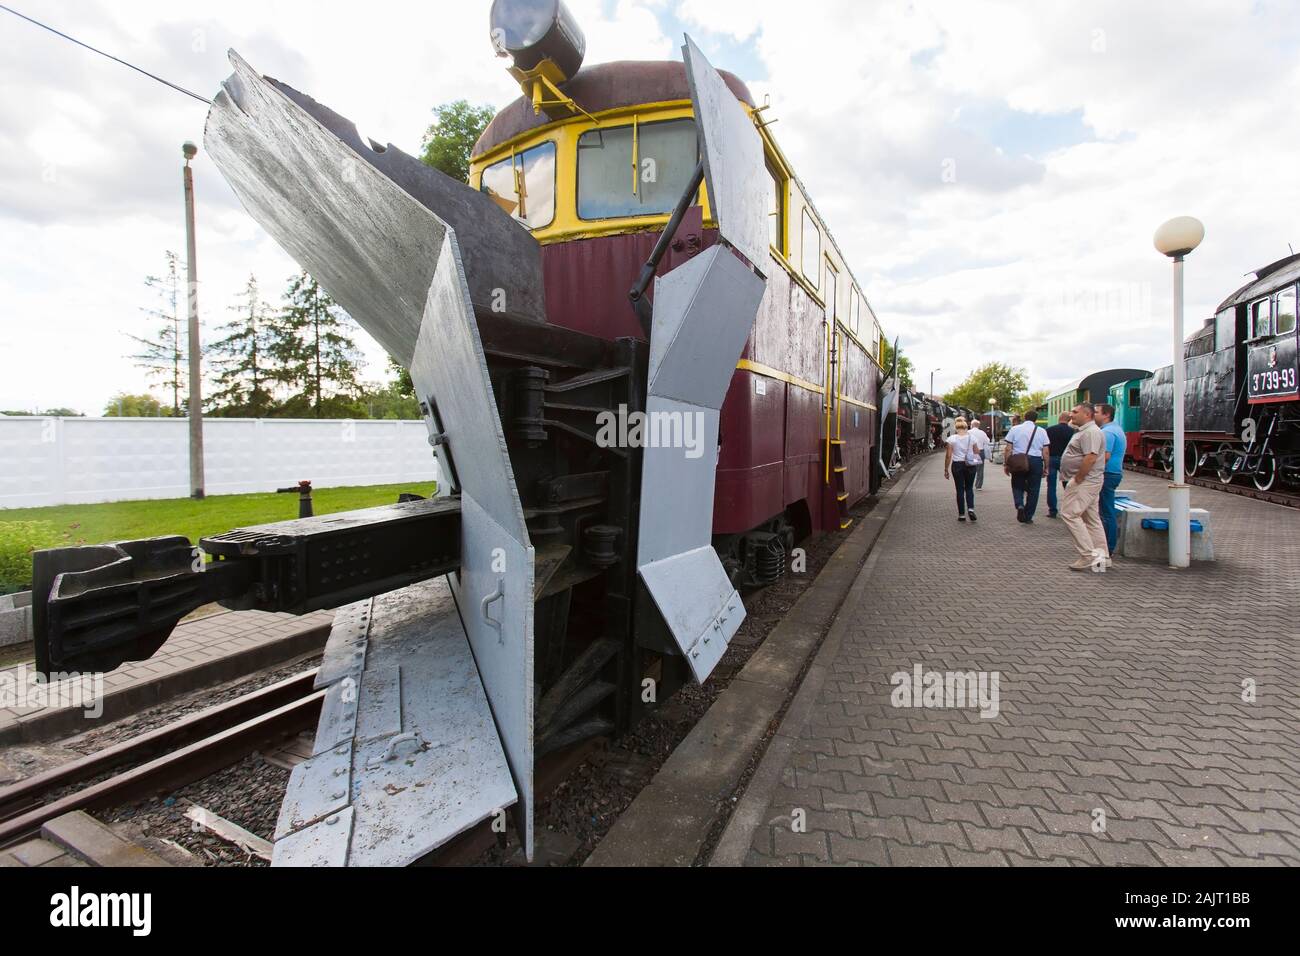 Many types of trains, both steam and electric locomotives are on display at the Brest Railway Museum in Belarus Stock Photo